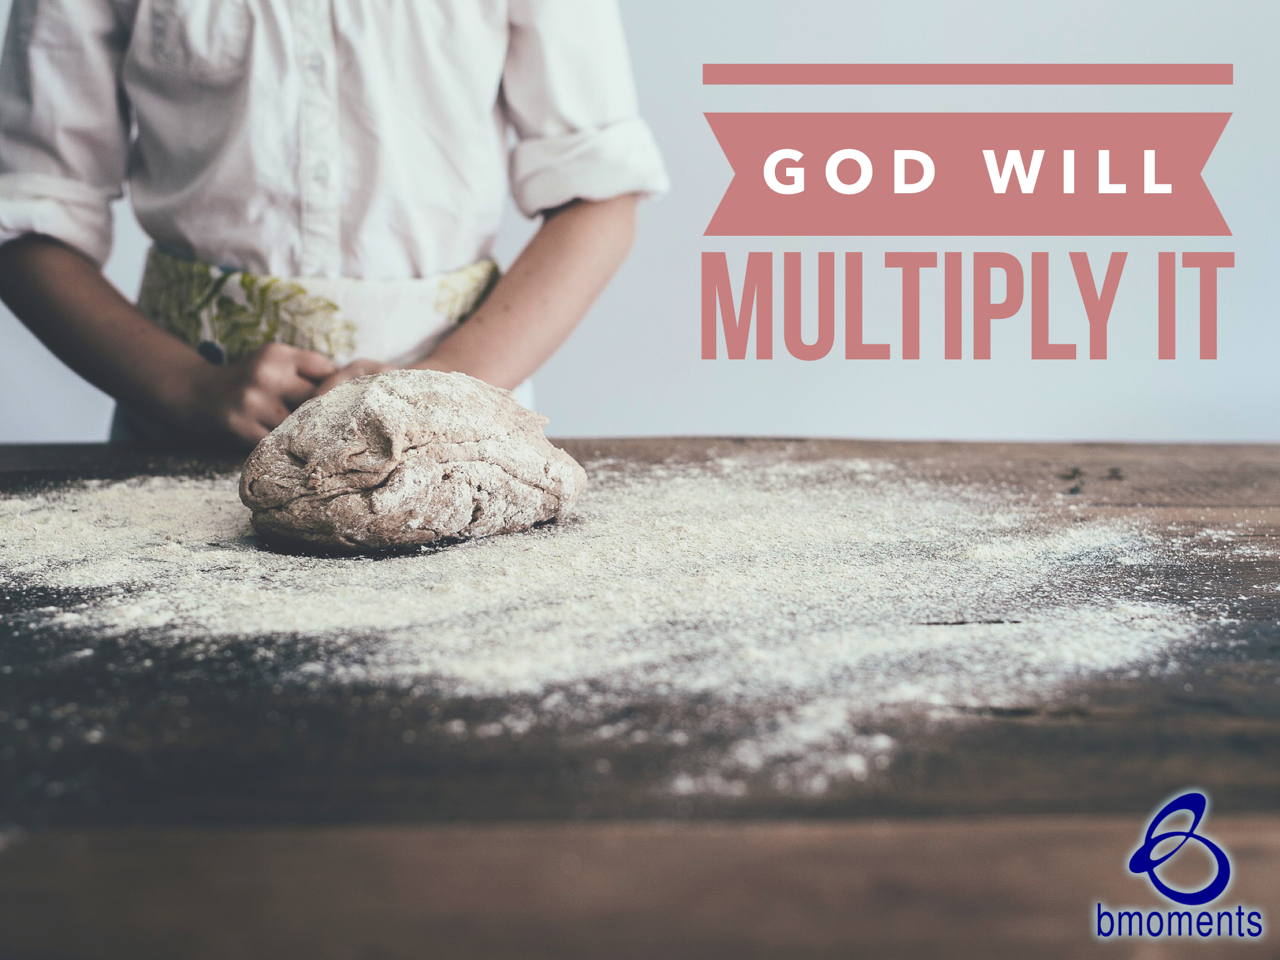 God’s Nature Is to Multiply What You Have